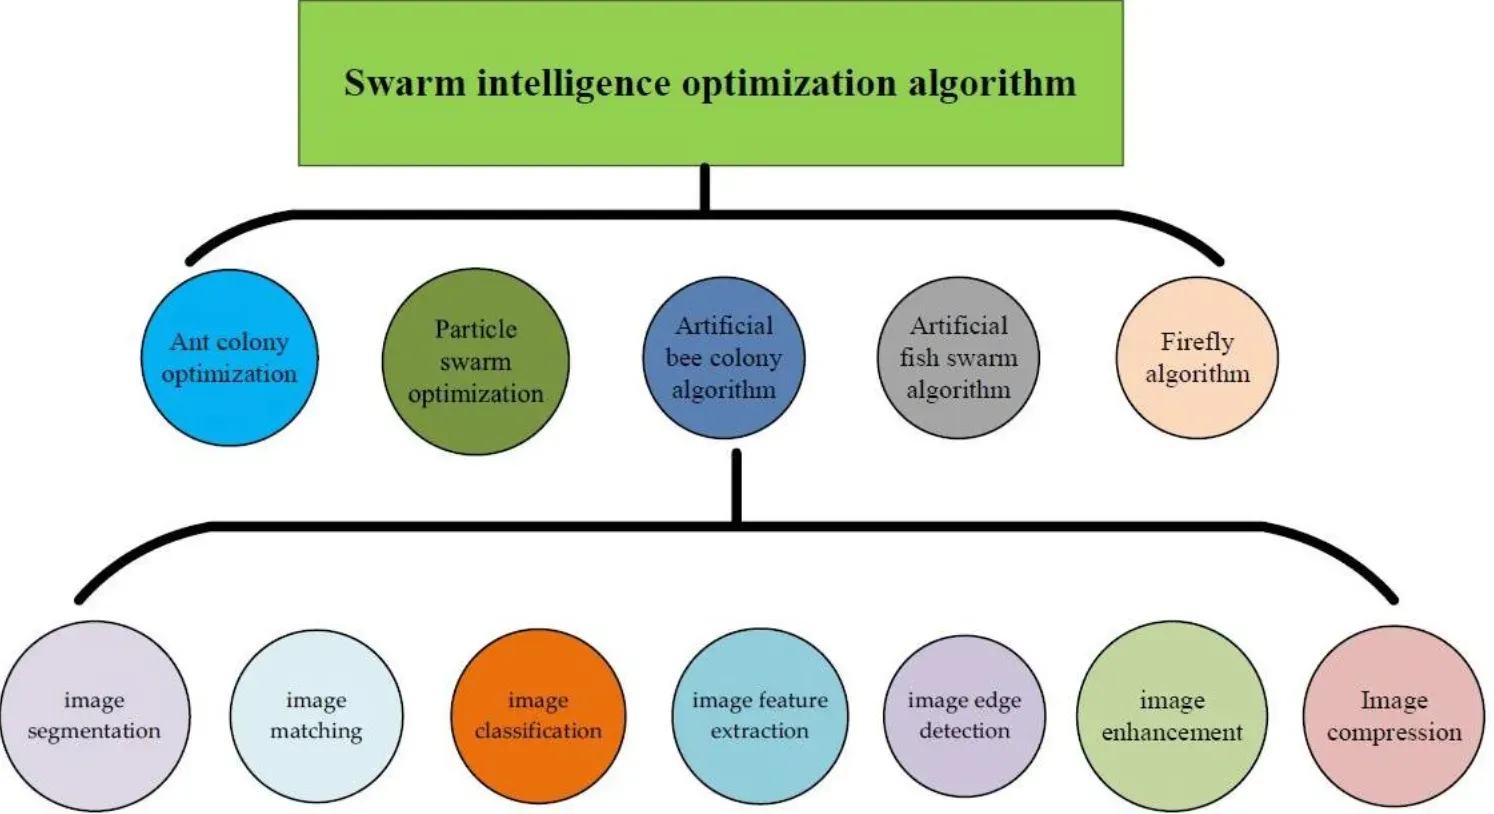 When is Swarm Intelligence used?